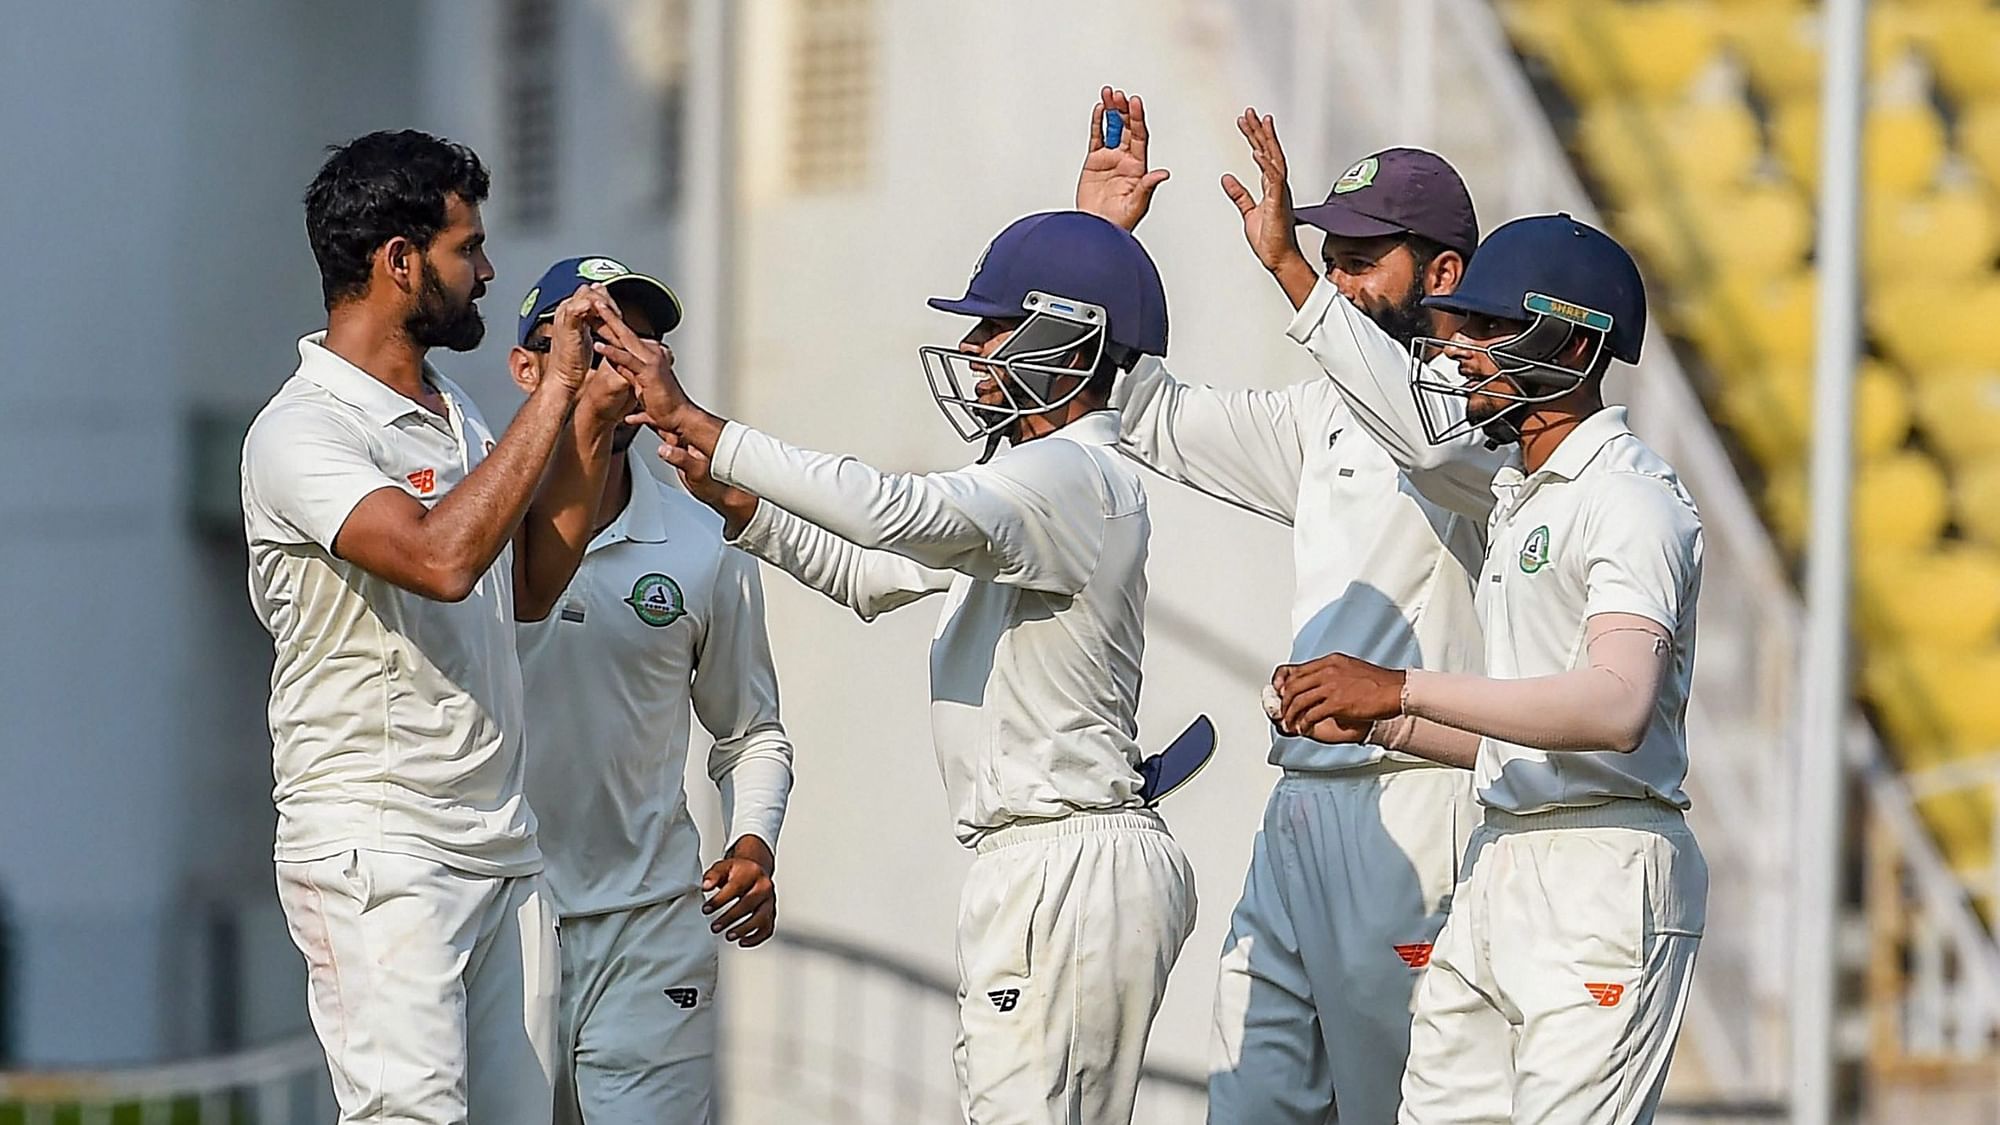 Vidarbha players celebrate a wicket during the Ranji Trophy final.